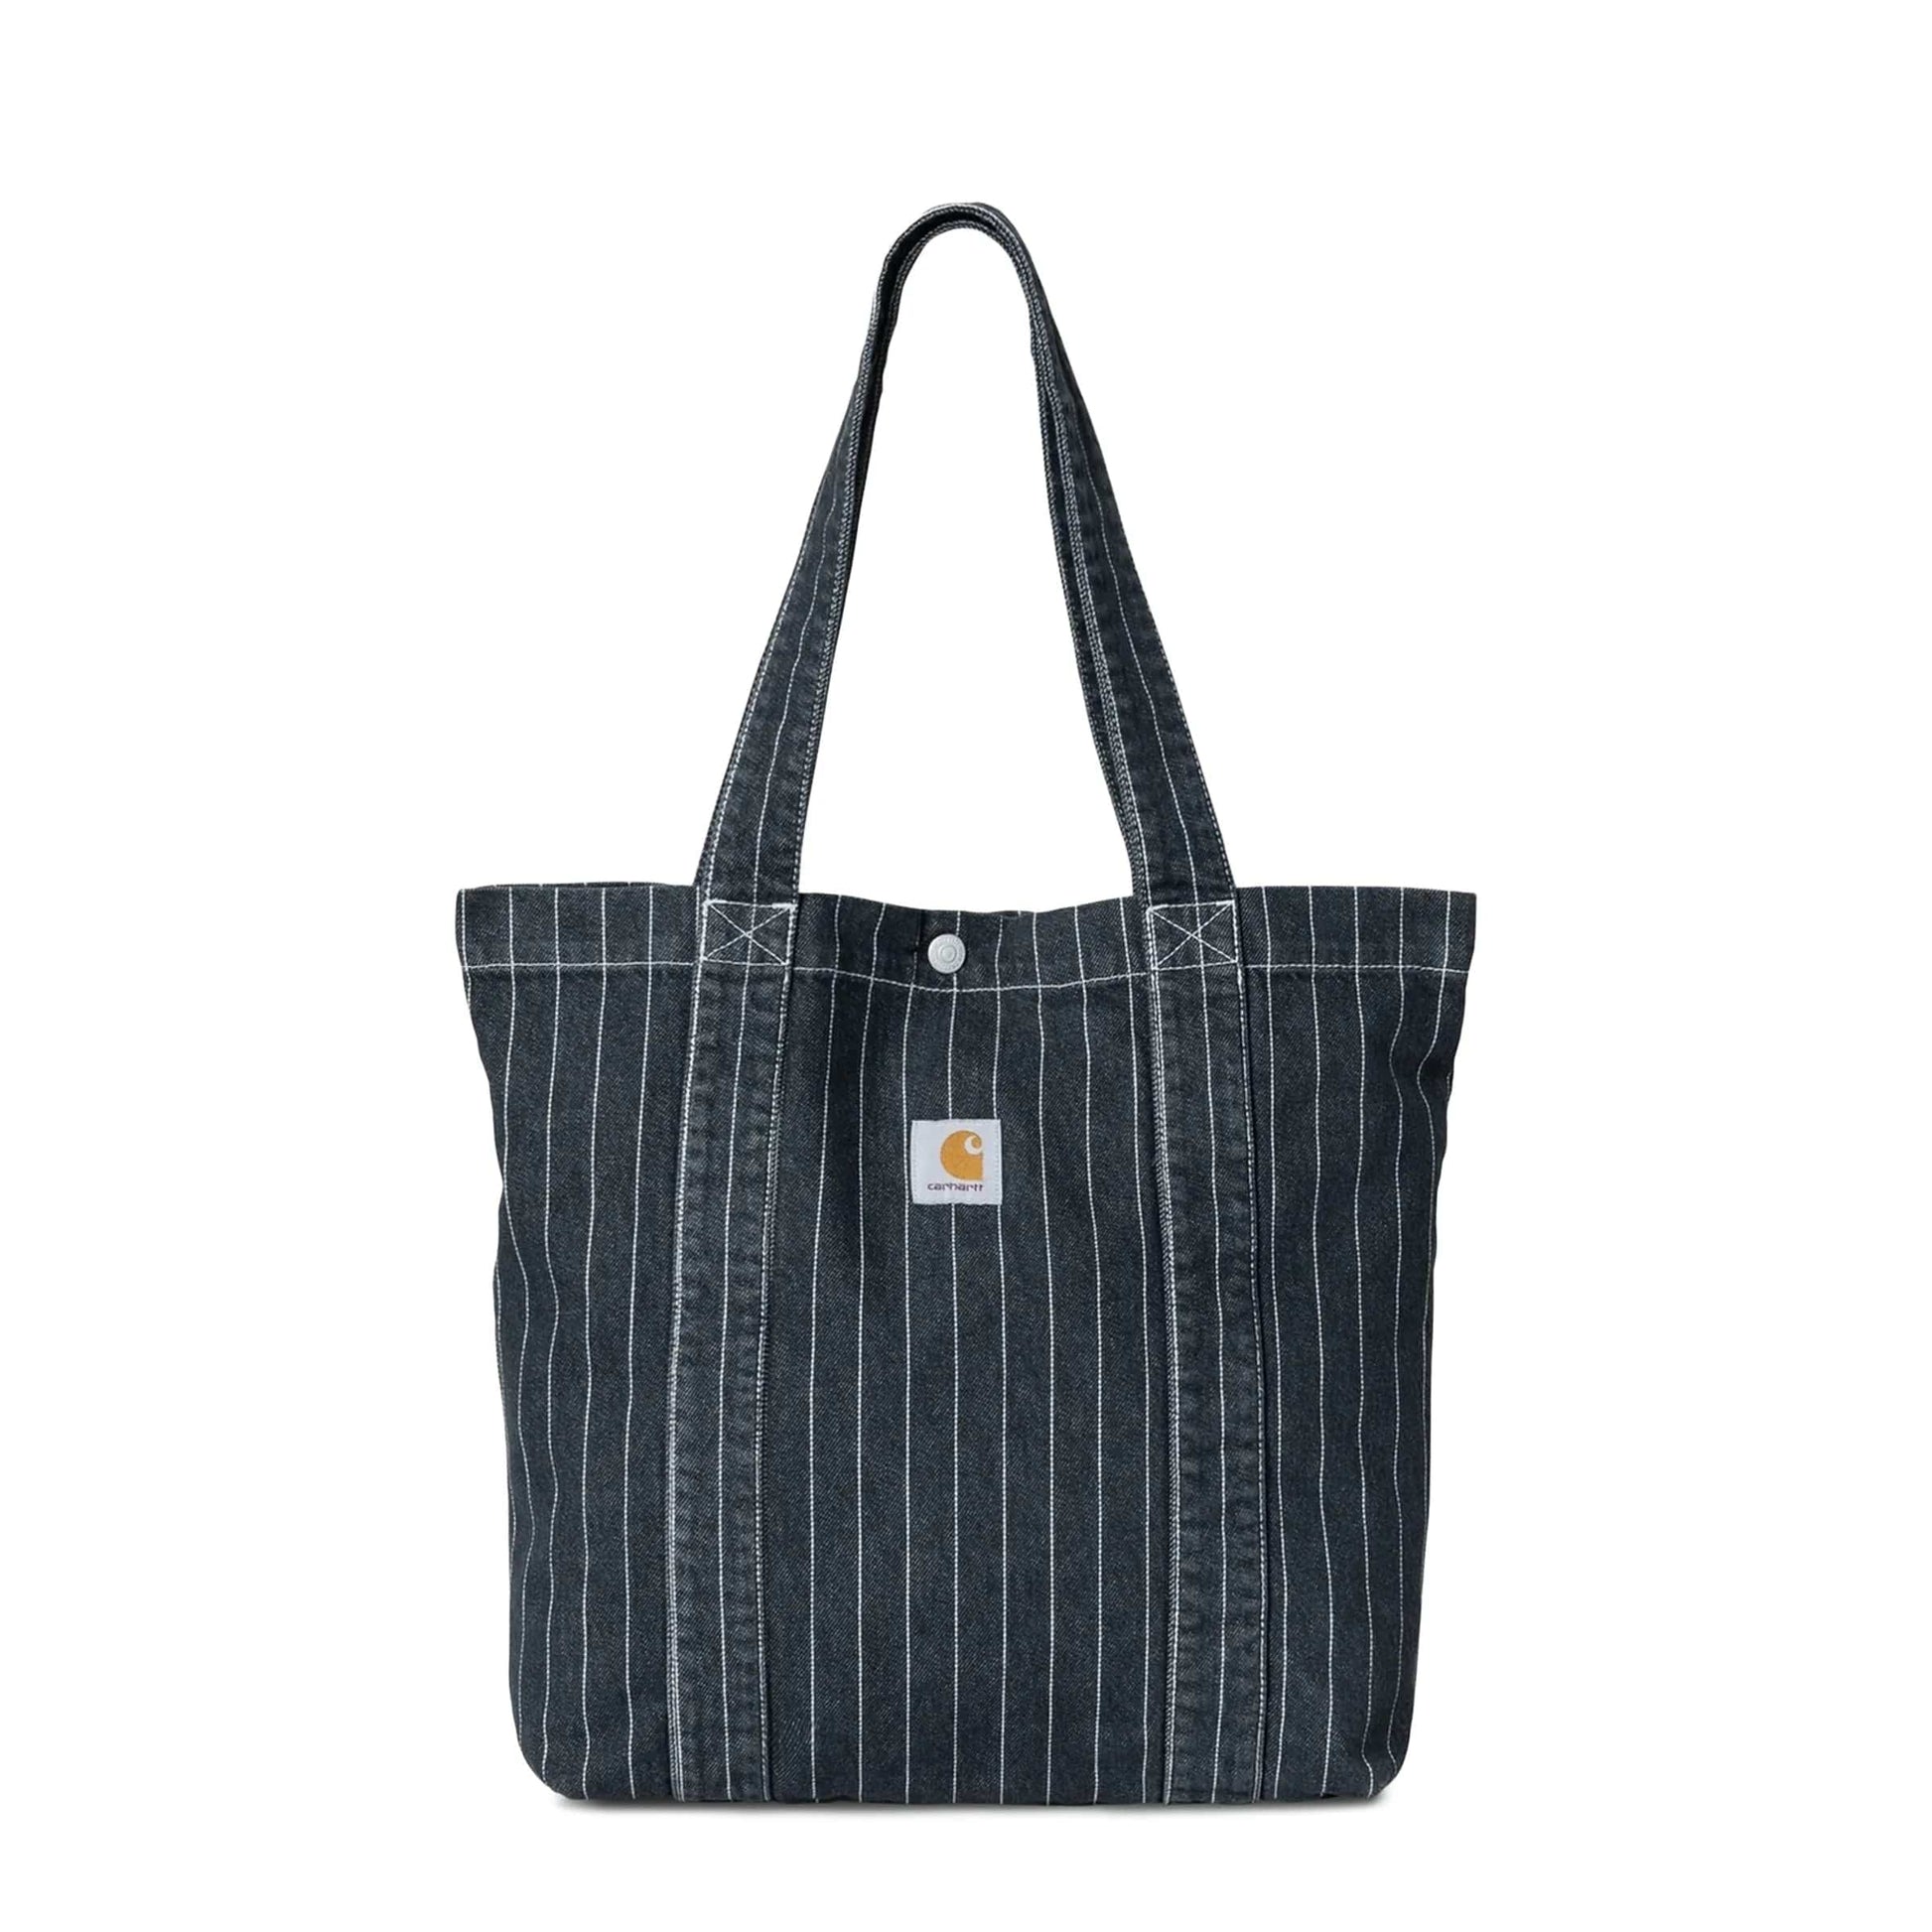 Carhartt WIP Bags ORLEAN STRIPE, BLACK WHITE (STONE WASHED) / O/S ORLEANS TOTE BAG